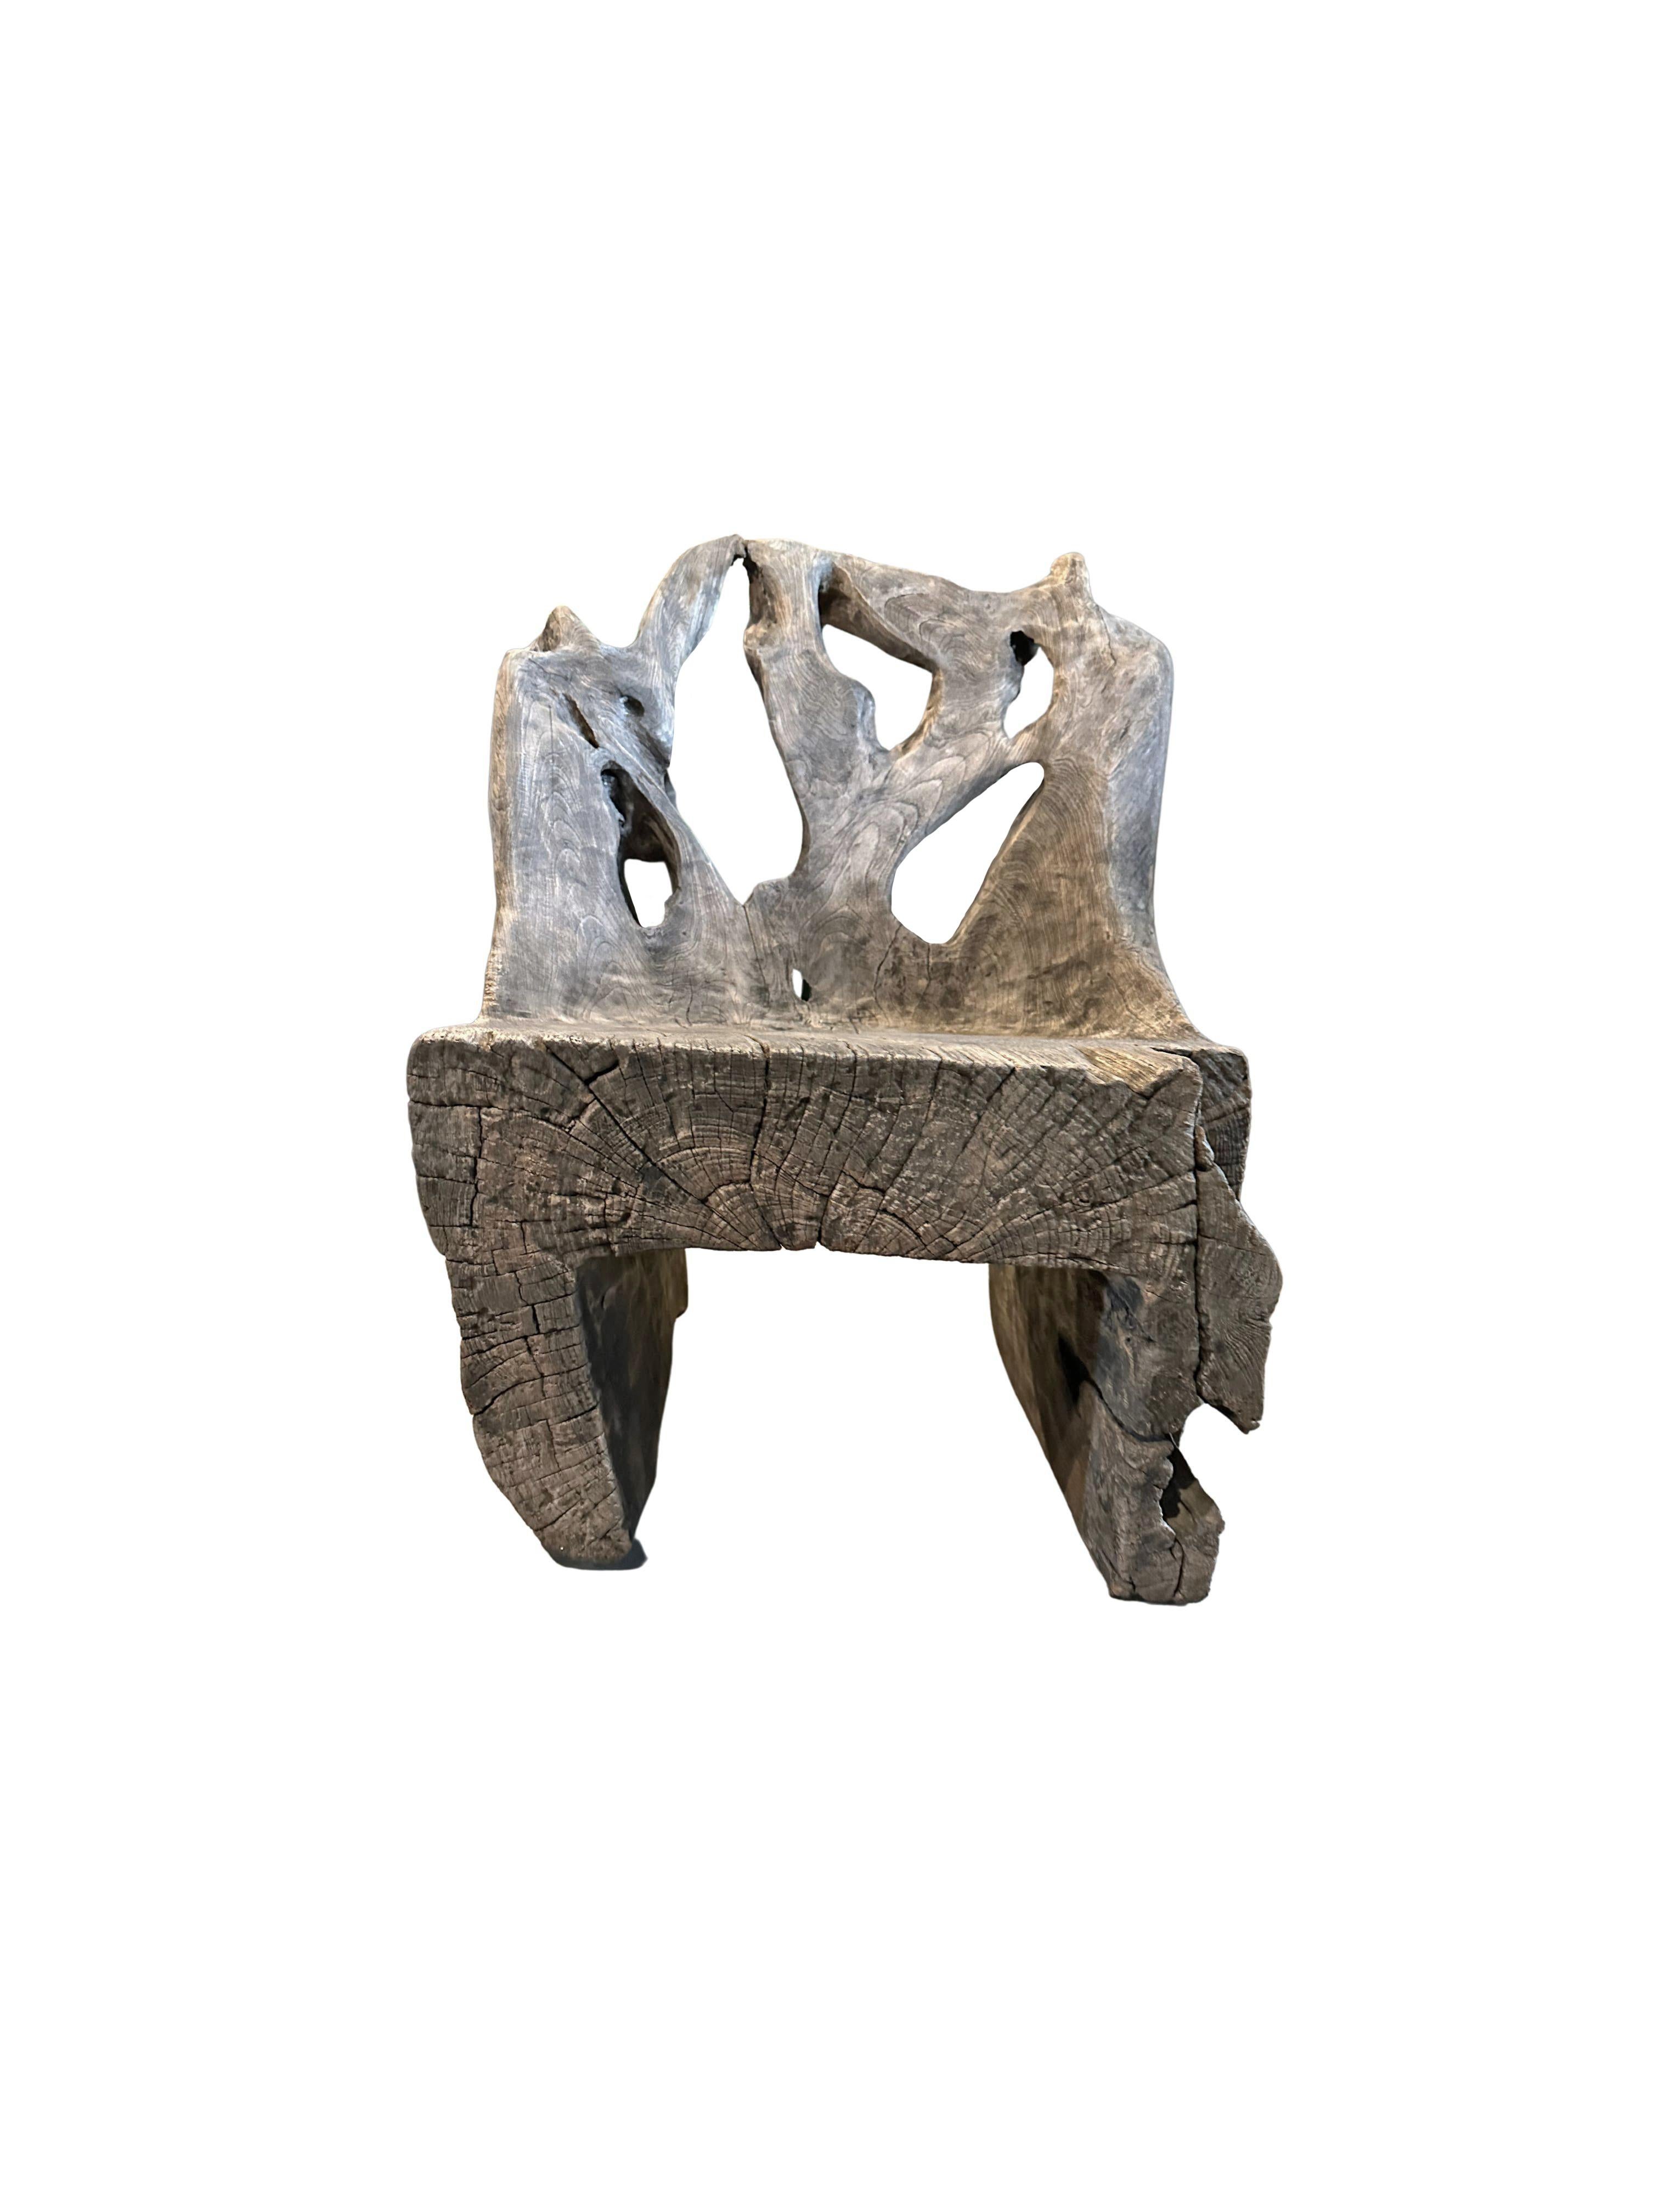 A wonderfully organic and sculptural chair. Carved from a single block of teak wood, this chair features wonderful contours and wood textures. This chair was sourced from bojonegoro on the island of Java. A unique object to bring warmth to any